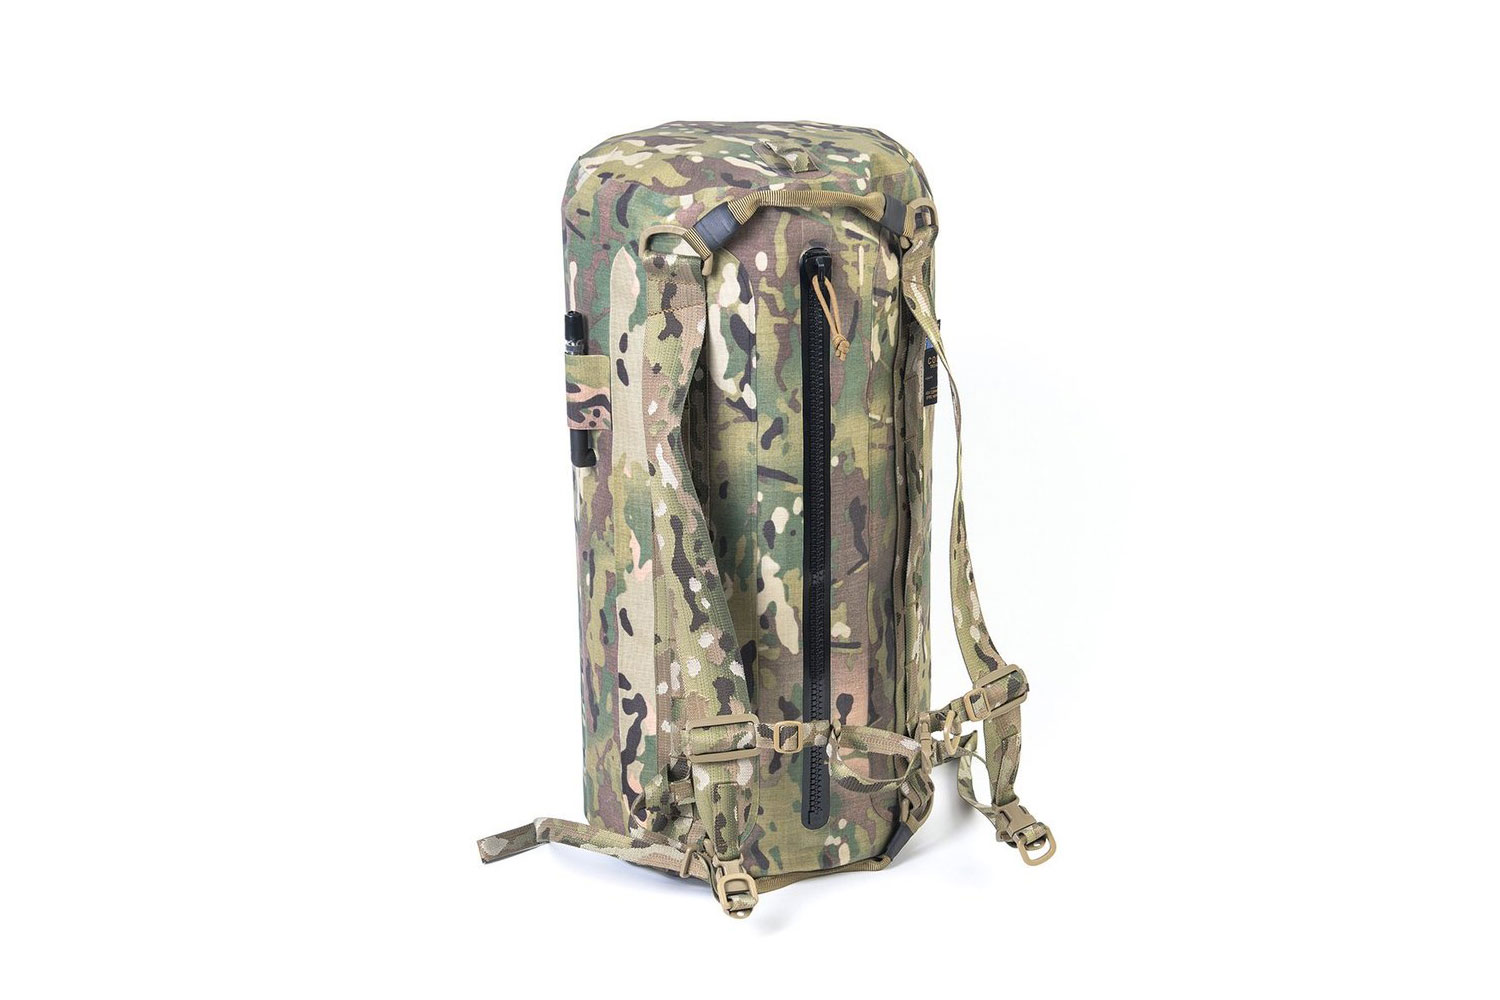 A camouflage Colfax Design Works Project T.O.A.D. Drybag on a white background.